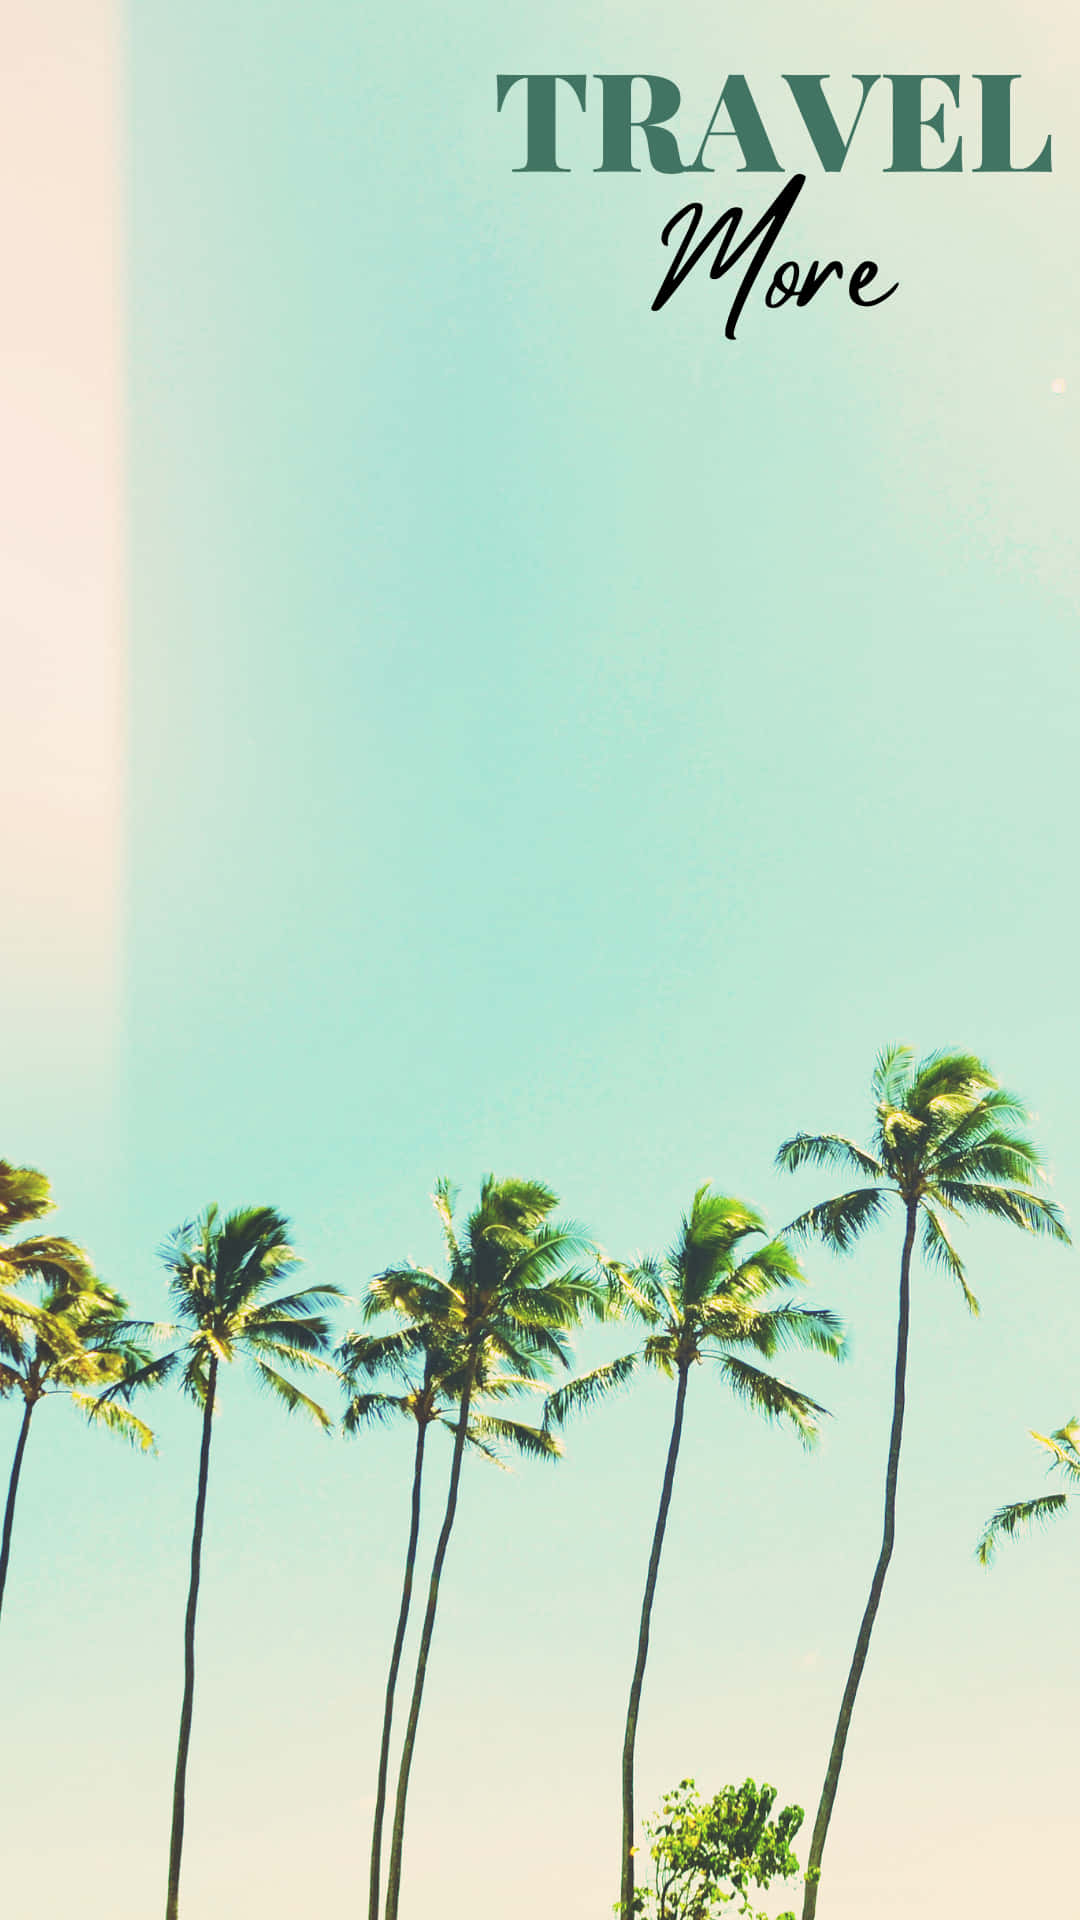 A Beach With Palm Trees Wallpaper